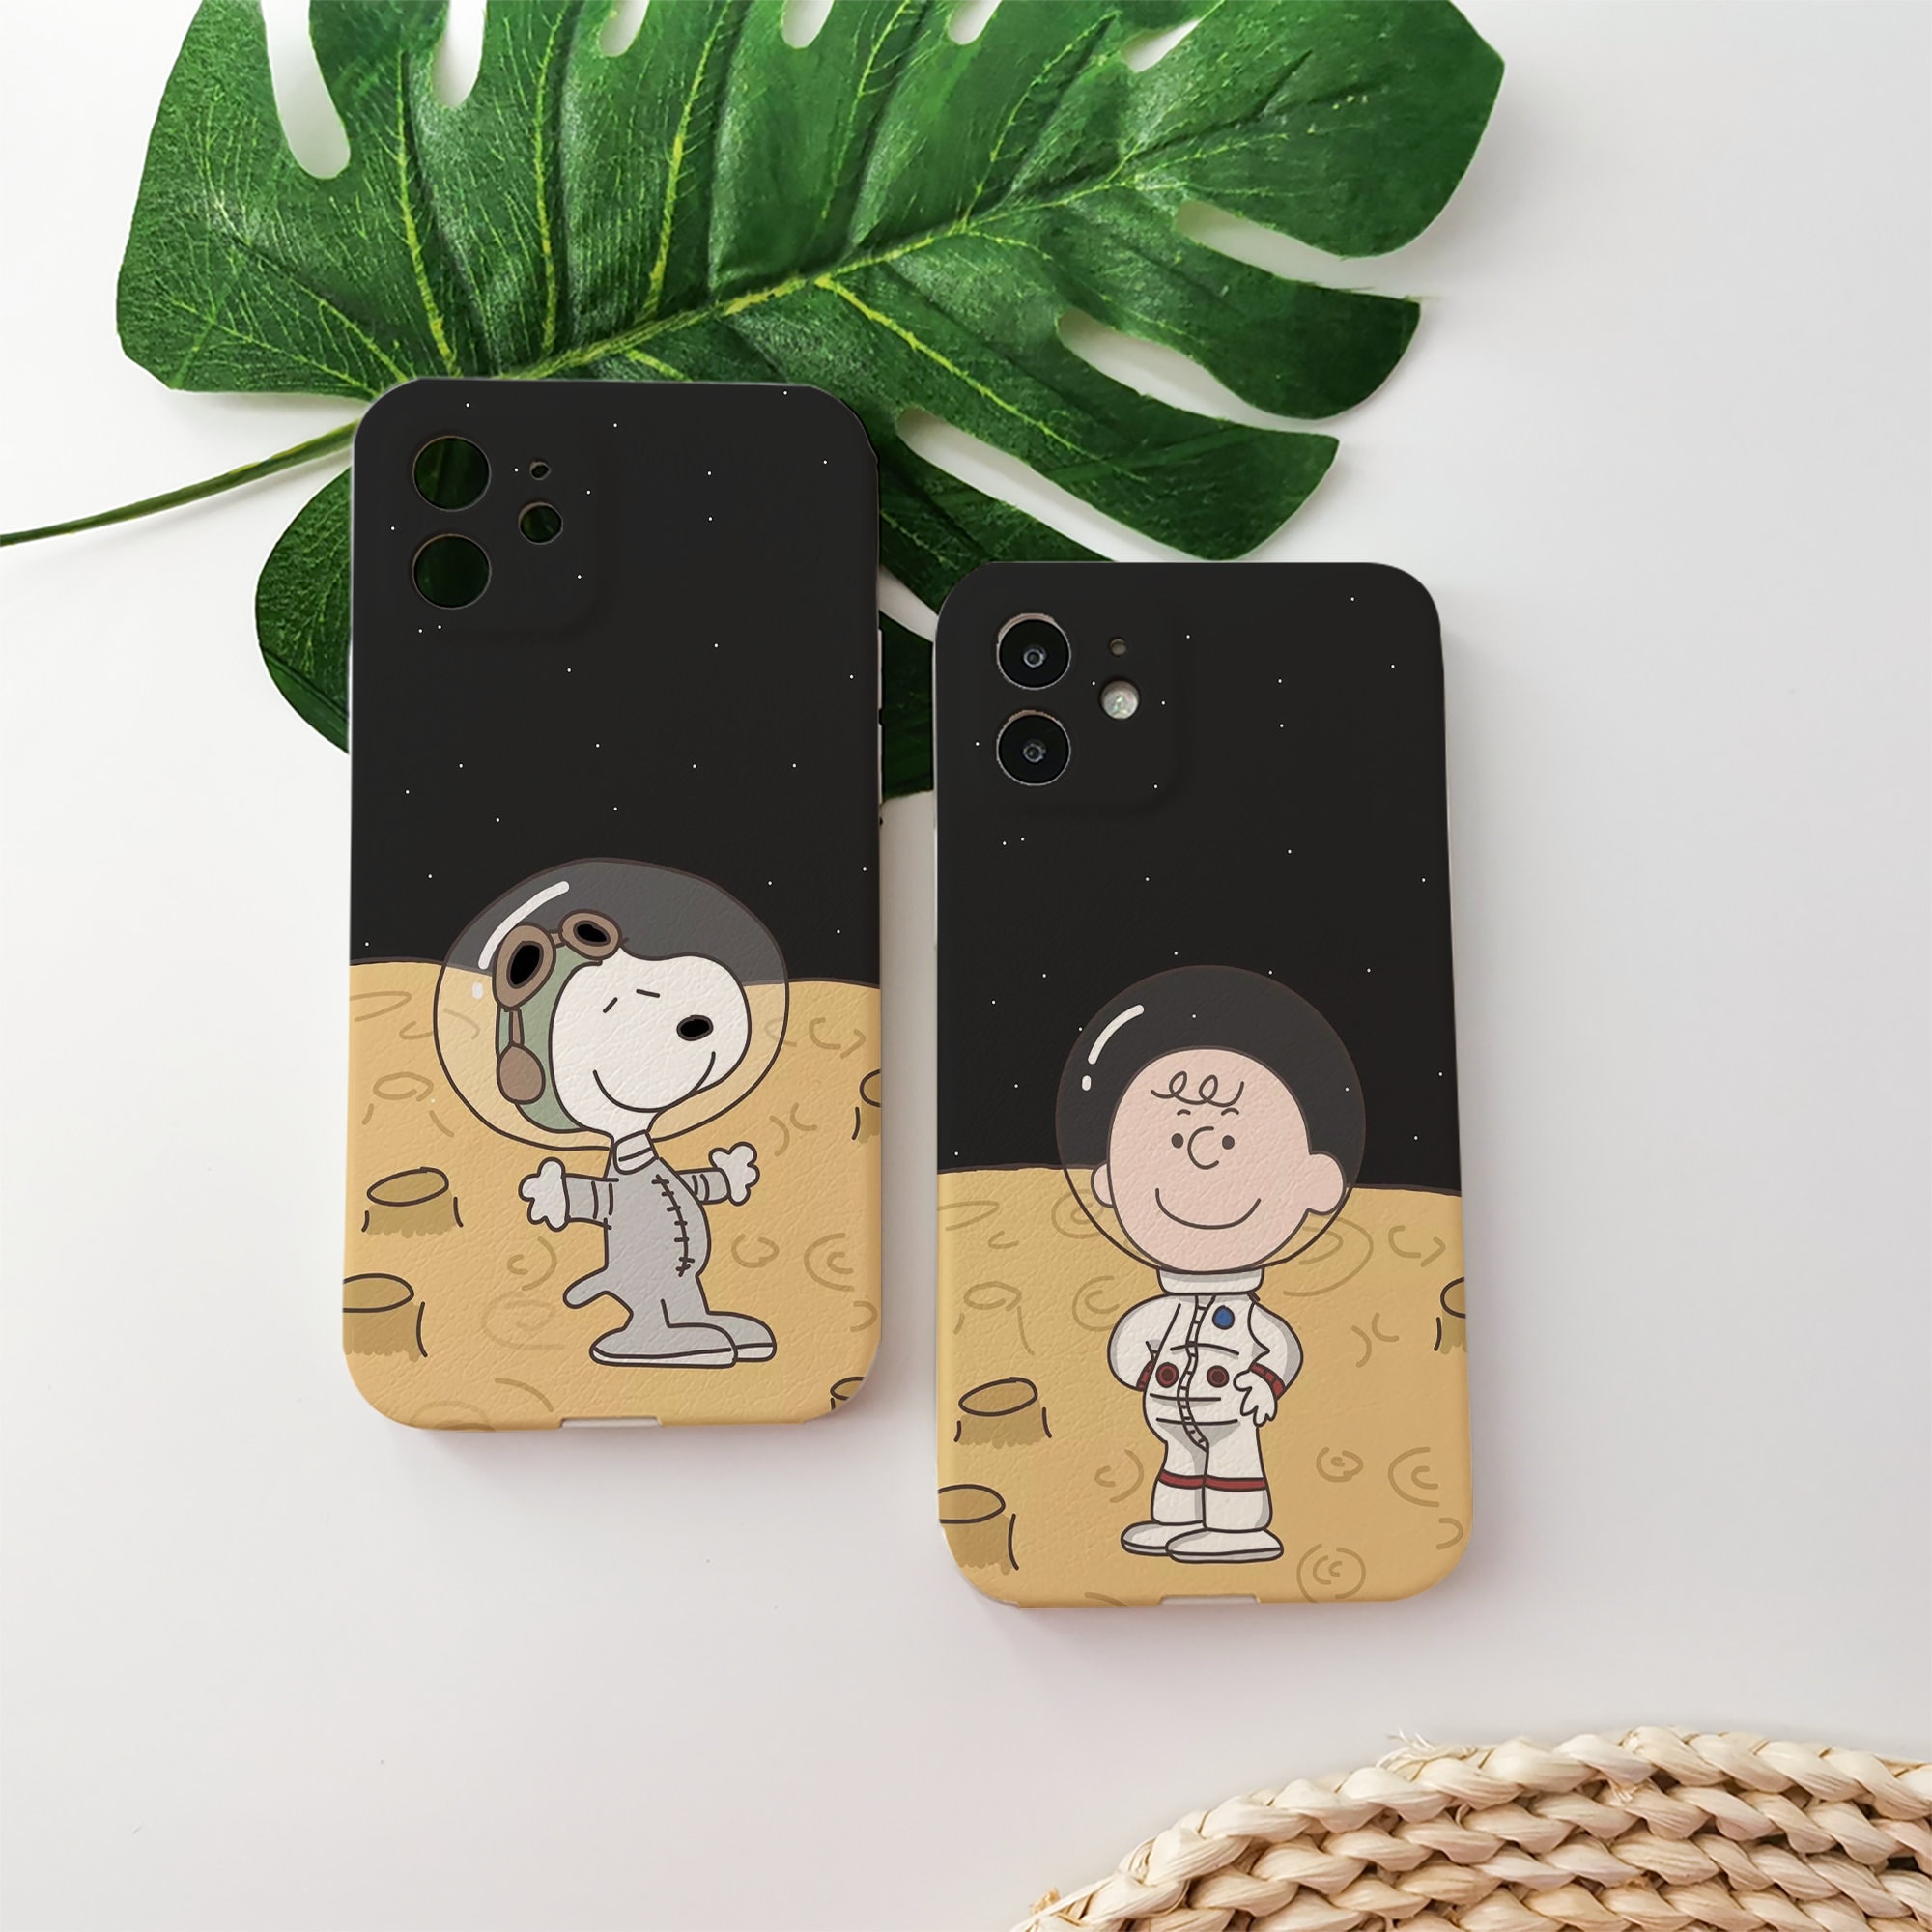 Cute Cartoon Snoopy Couple Leather Phone Case Cover For iPhone 13/12/11 Pro Max, Xs, 7, 8, SE, XR